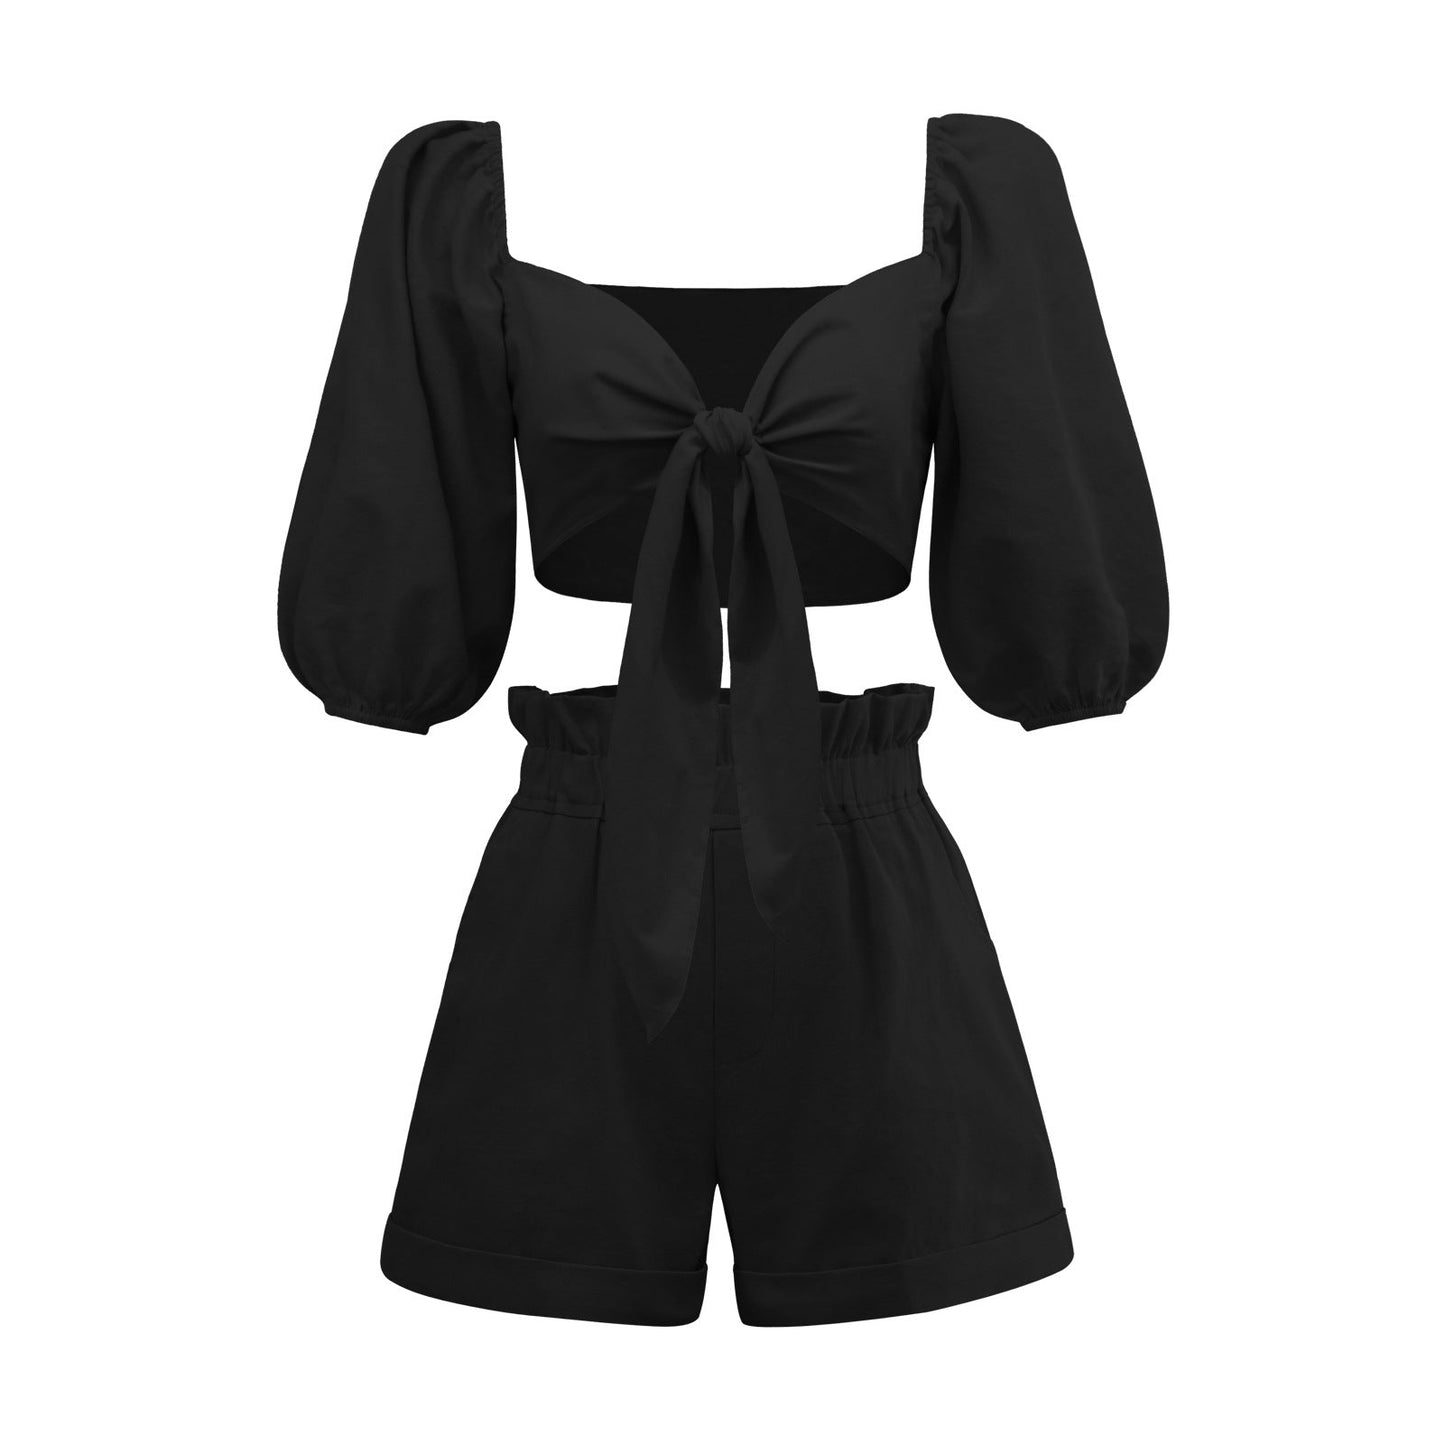 Casual Short Midriff Baring Tops and Shorts Sets for Women-Suits-Black-S-Free Shipping Leatheretro